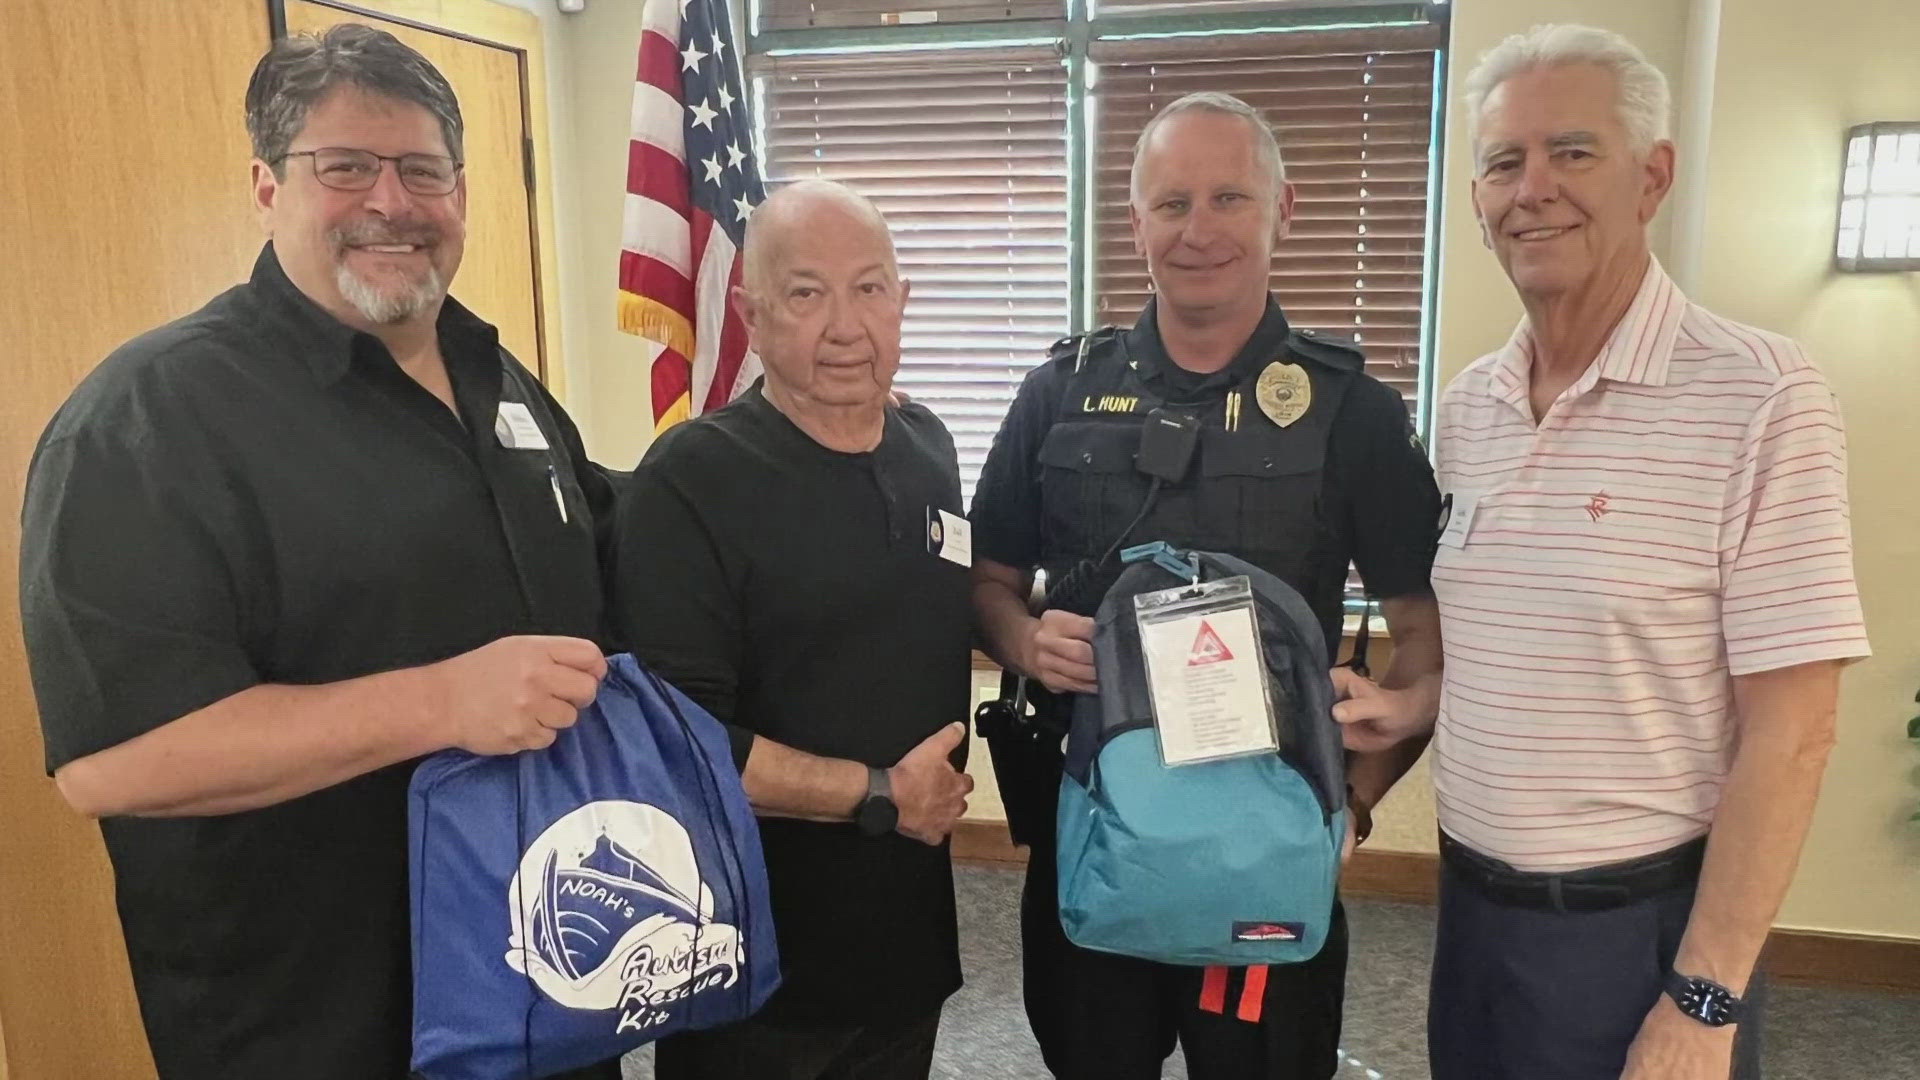 Bill Cassel has been assembling and donating the kits for more than three years to assist kids with autism during encounters with first responders.